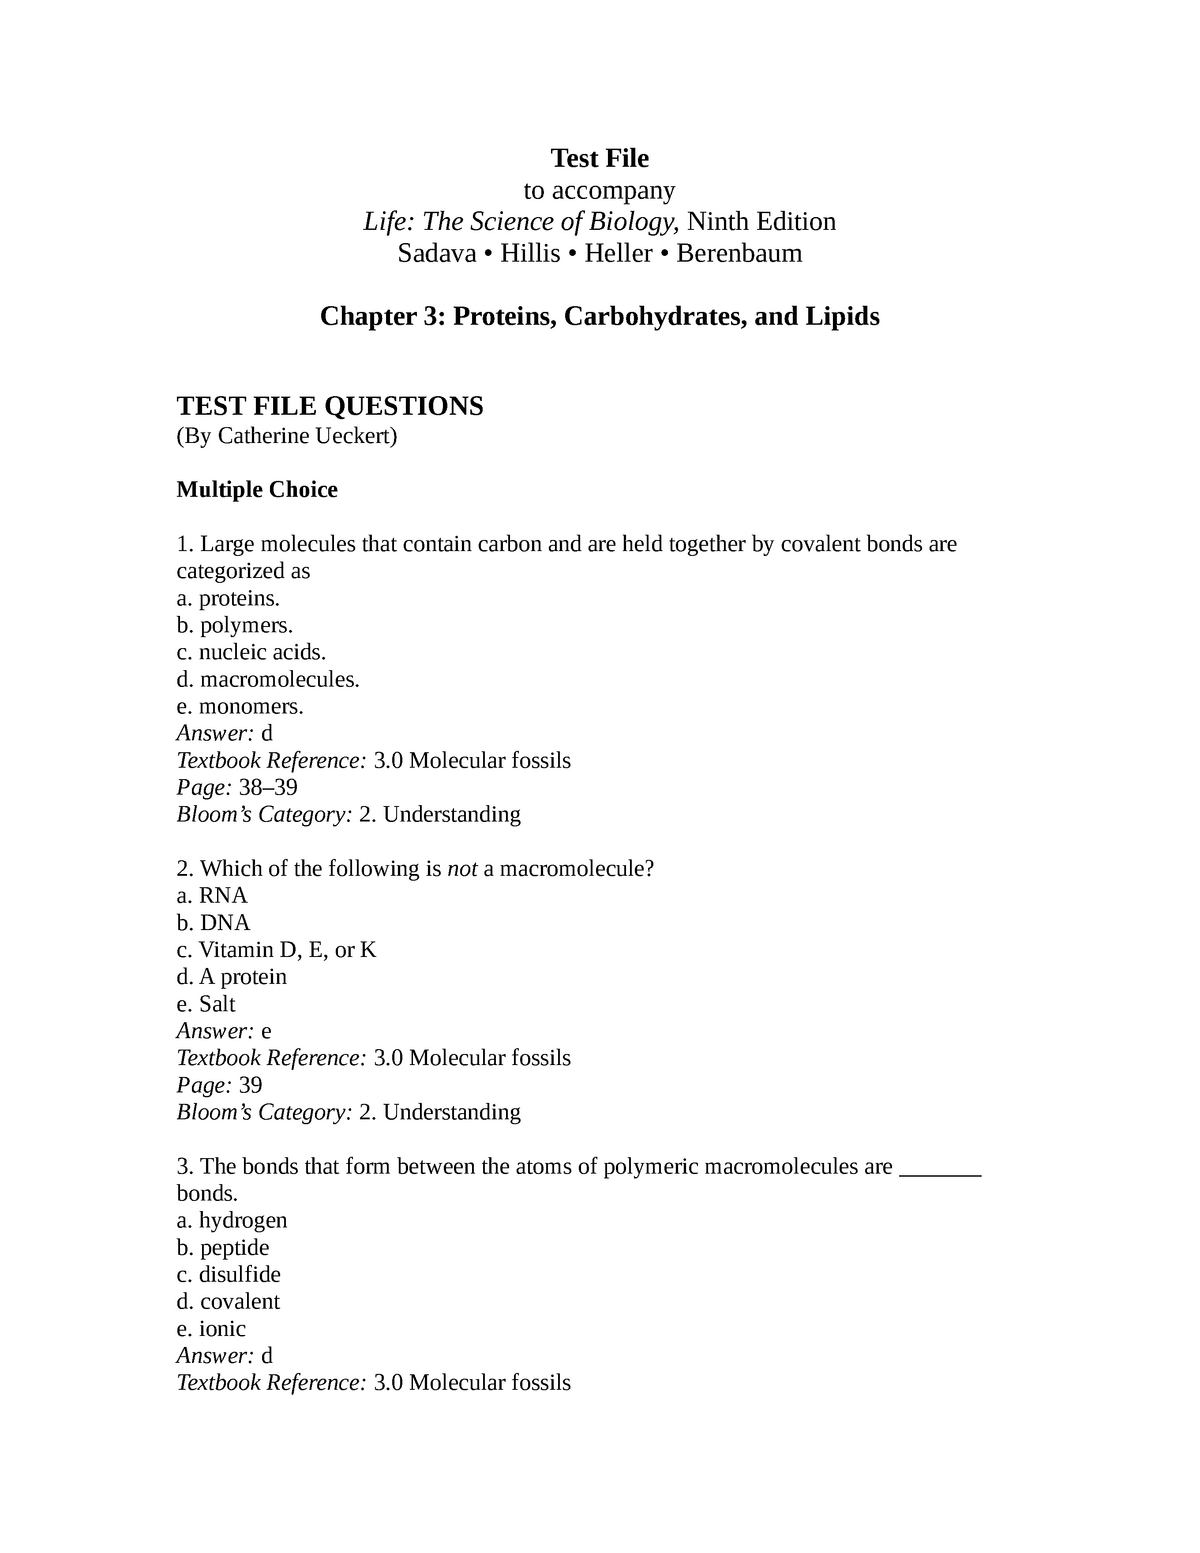 Chapter 3 Test Bank Test File to Life The Science of